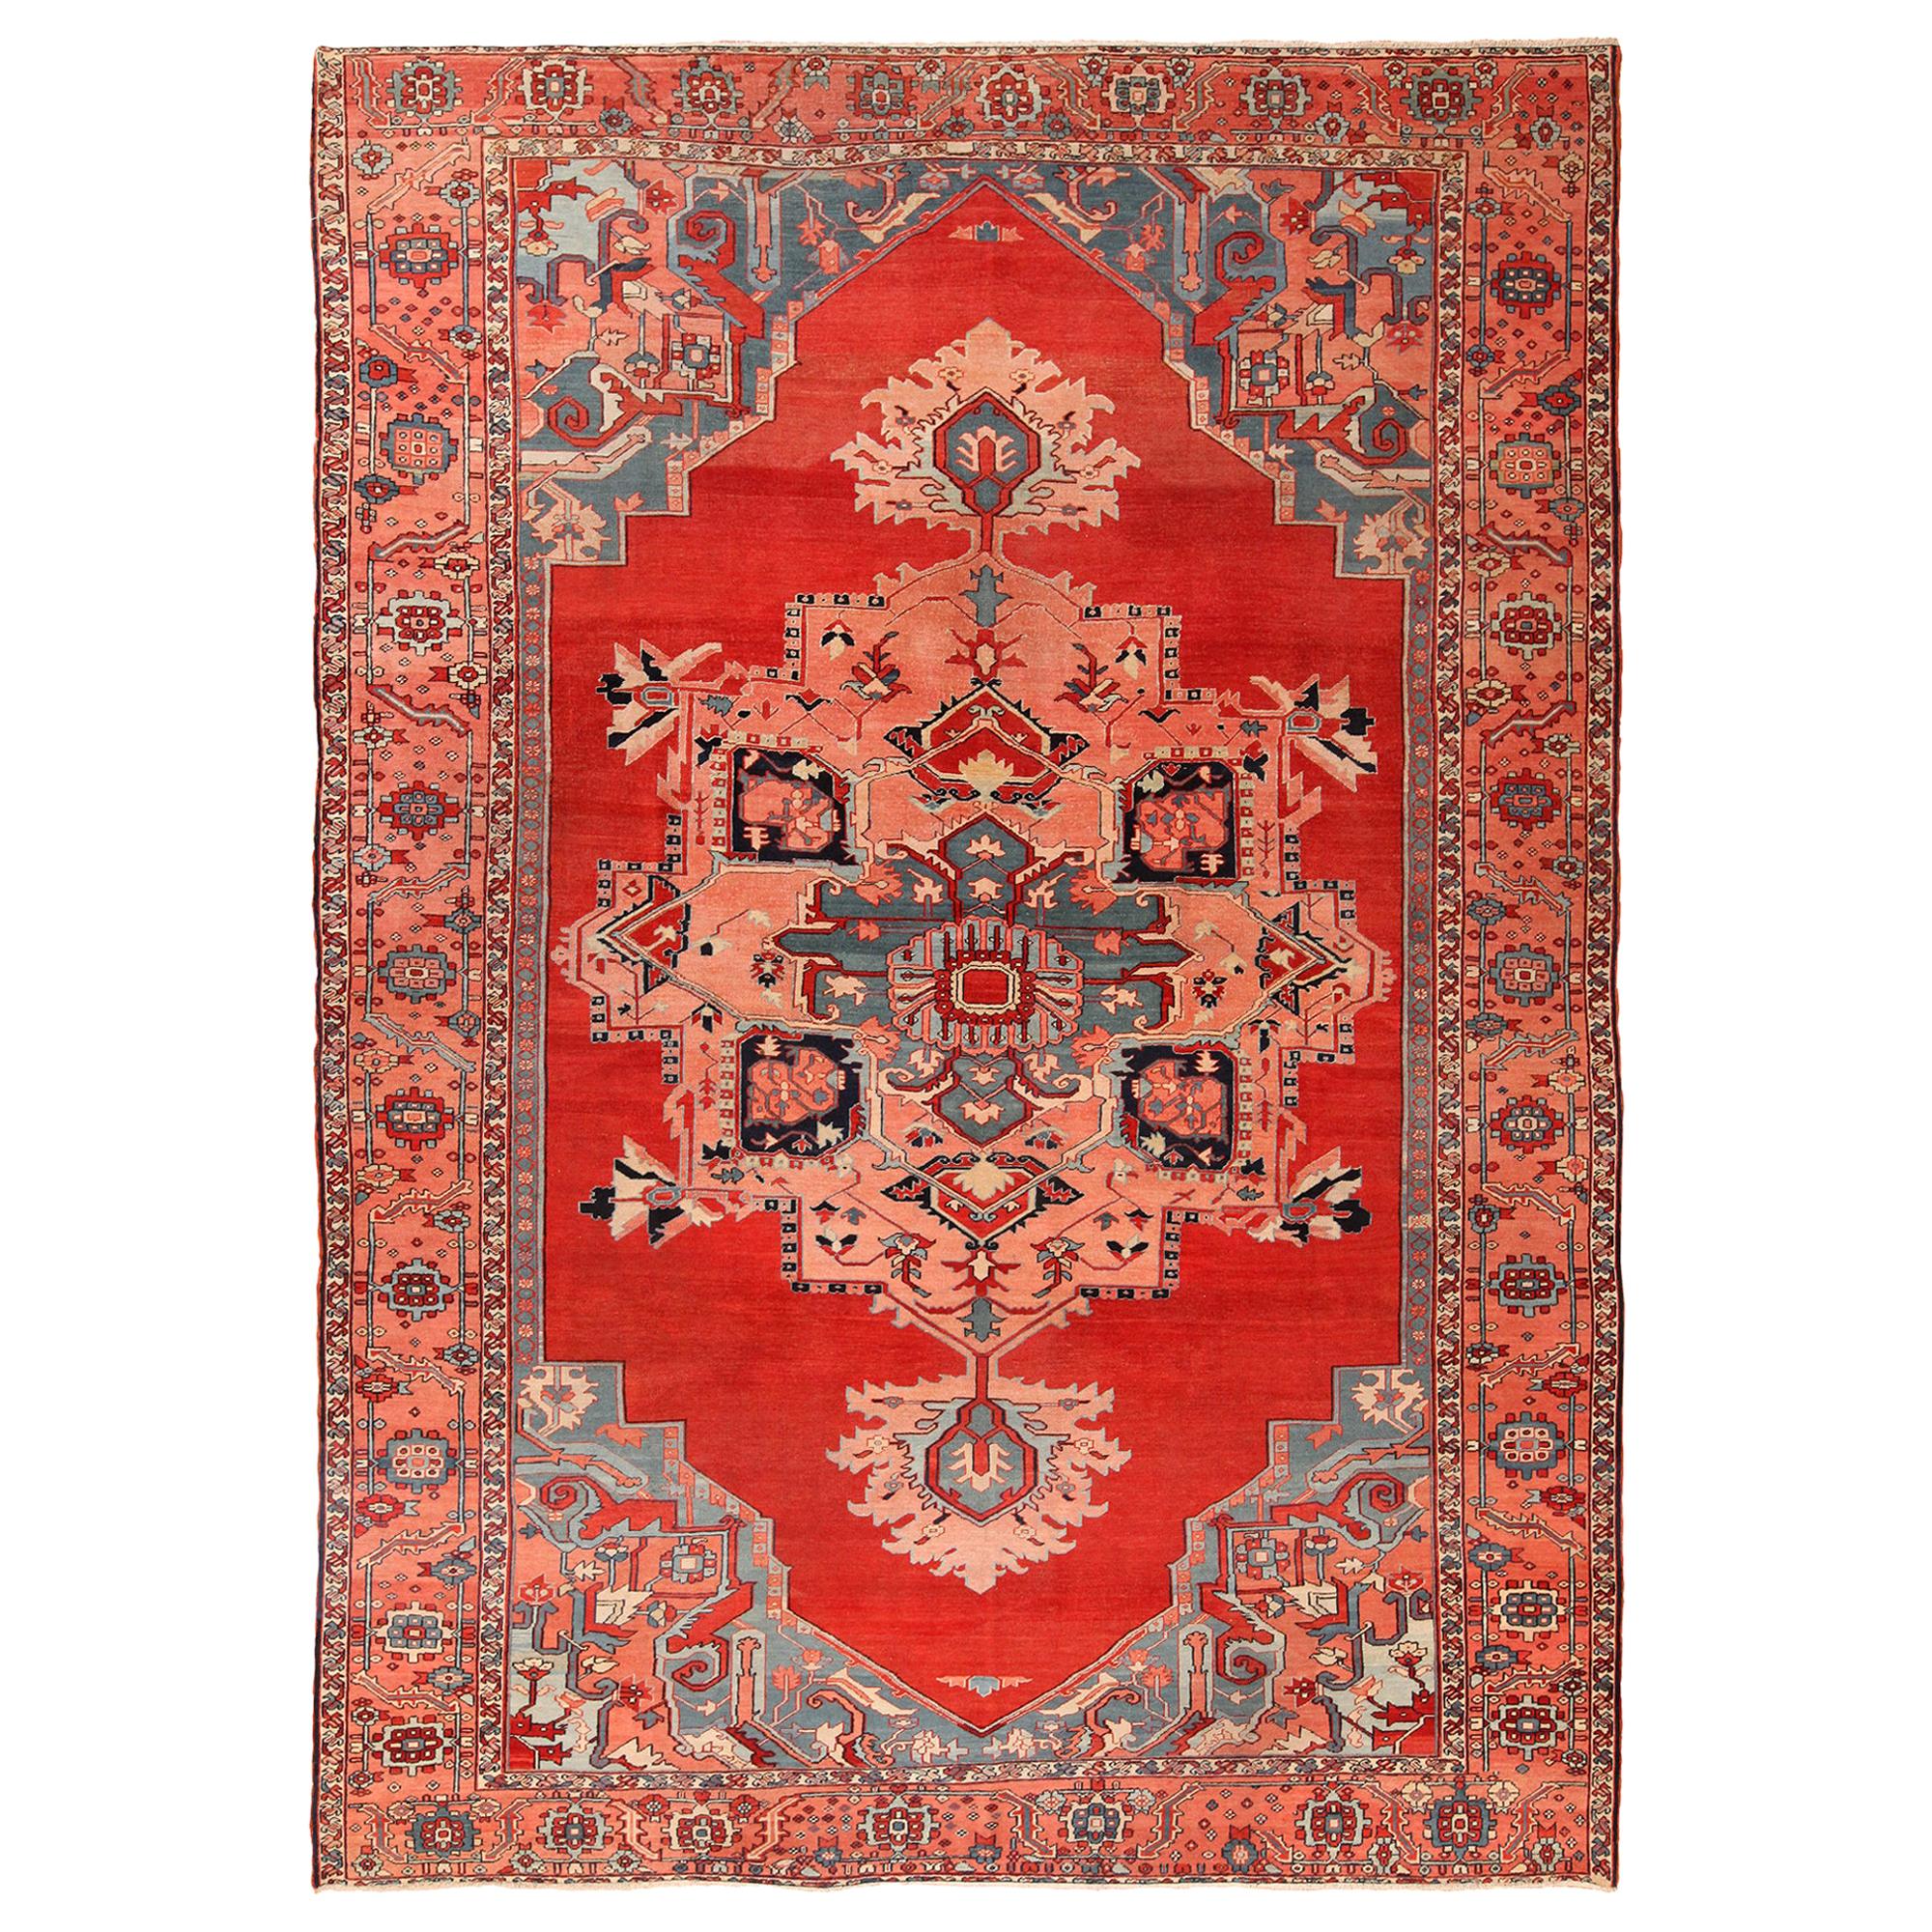 Antique Persian Serapi Rug. Size: 9 ft. 2 in x 13 ft